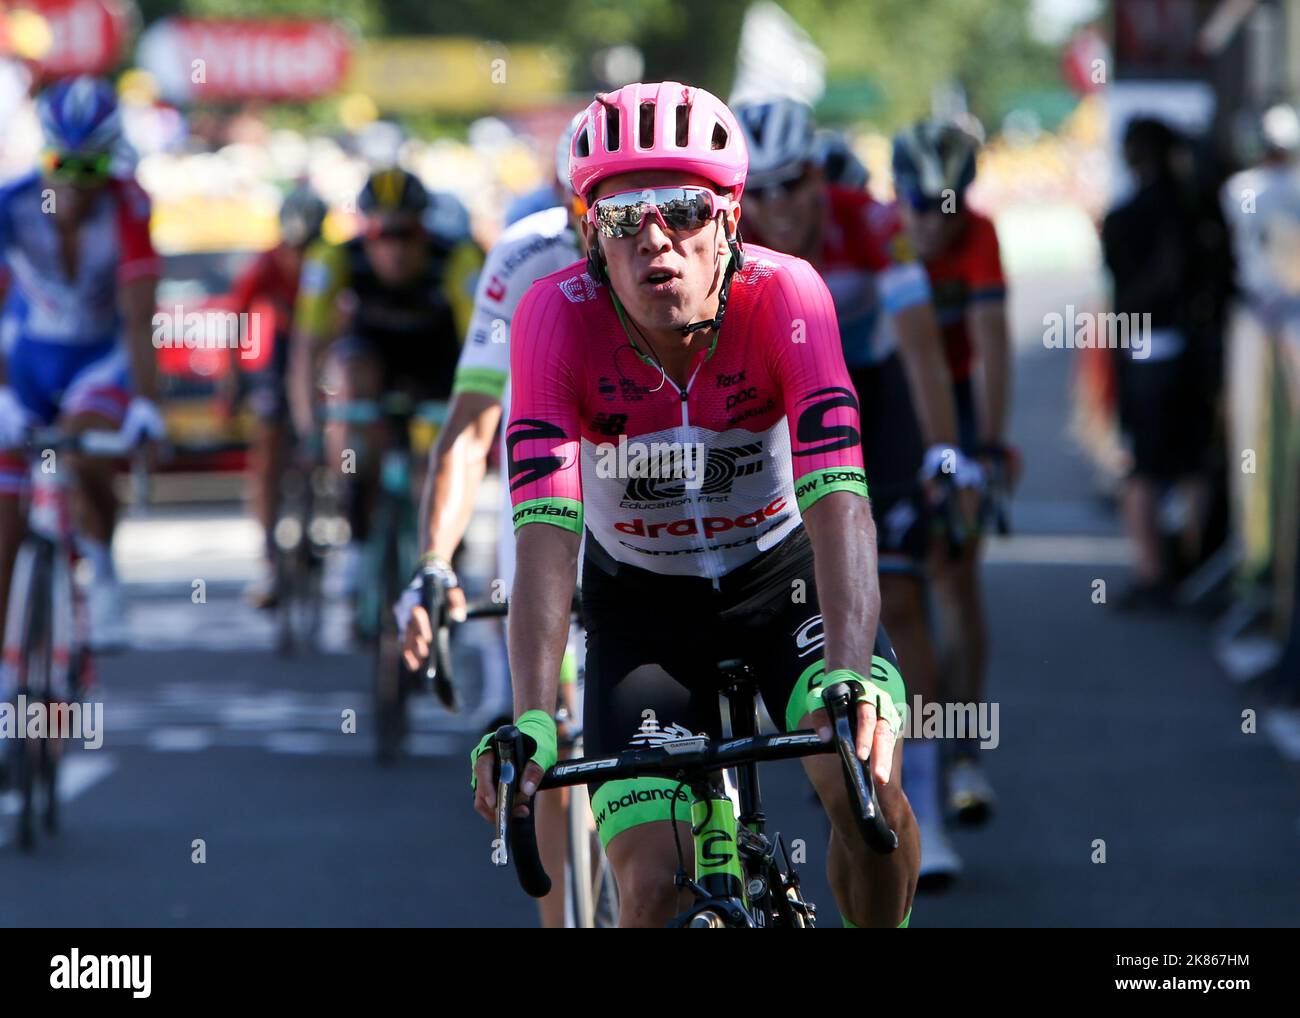 rigoberto Uran (EF Education First Drapac) during stage 6 of the Tour de France from Brest to Mur-de-Bretagne Guerledan Stock Photo